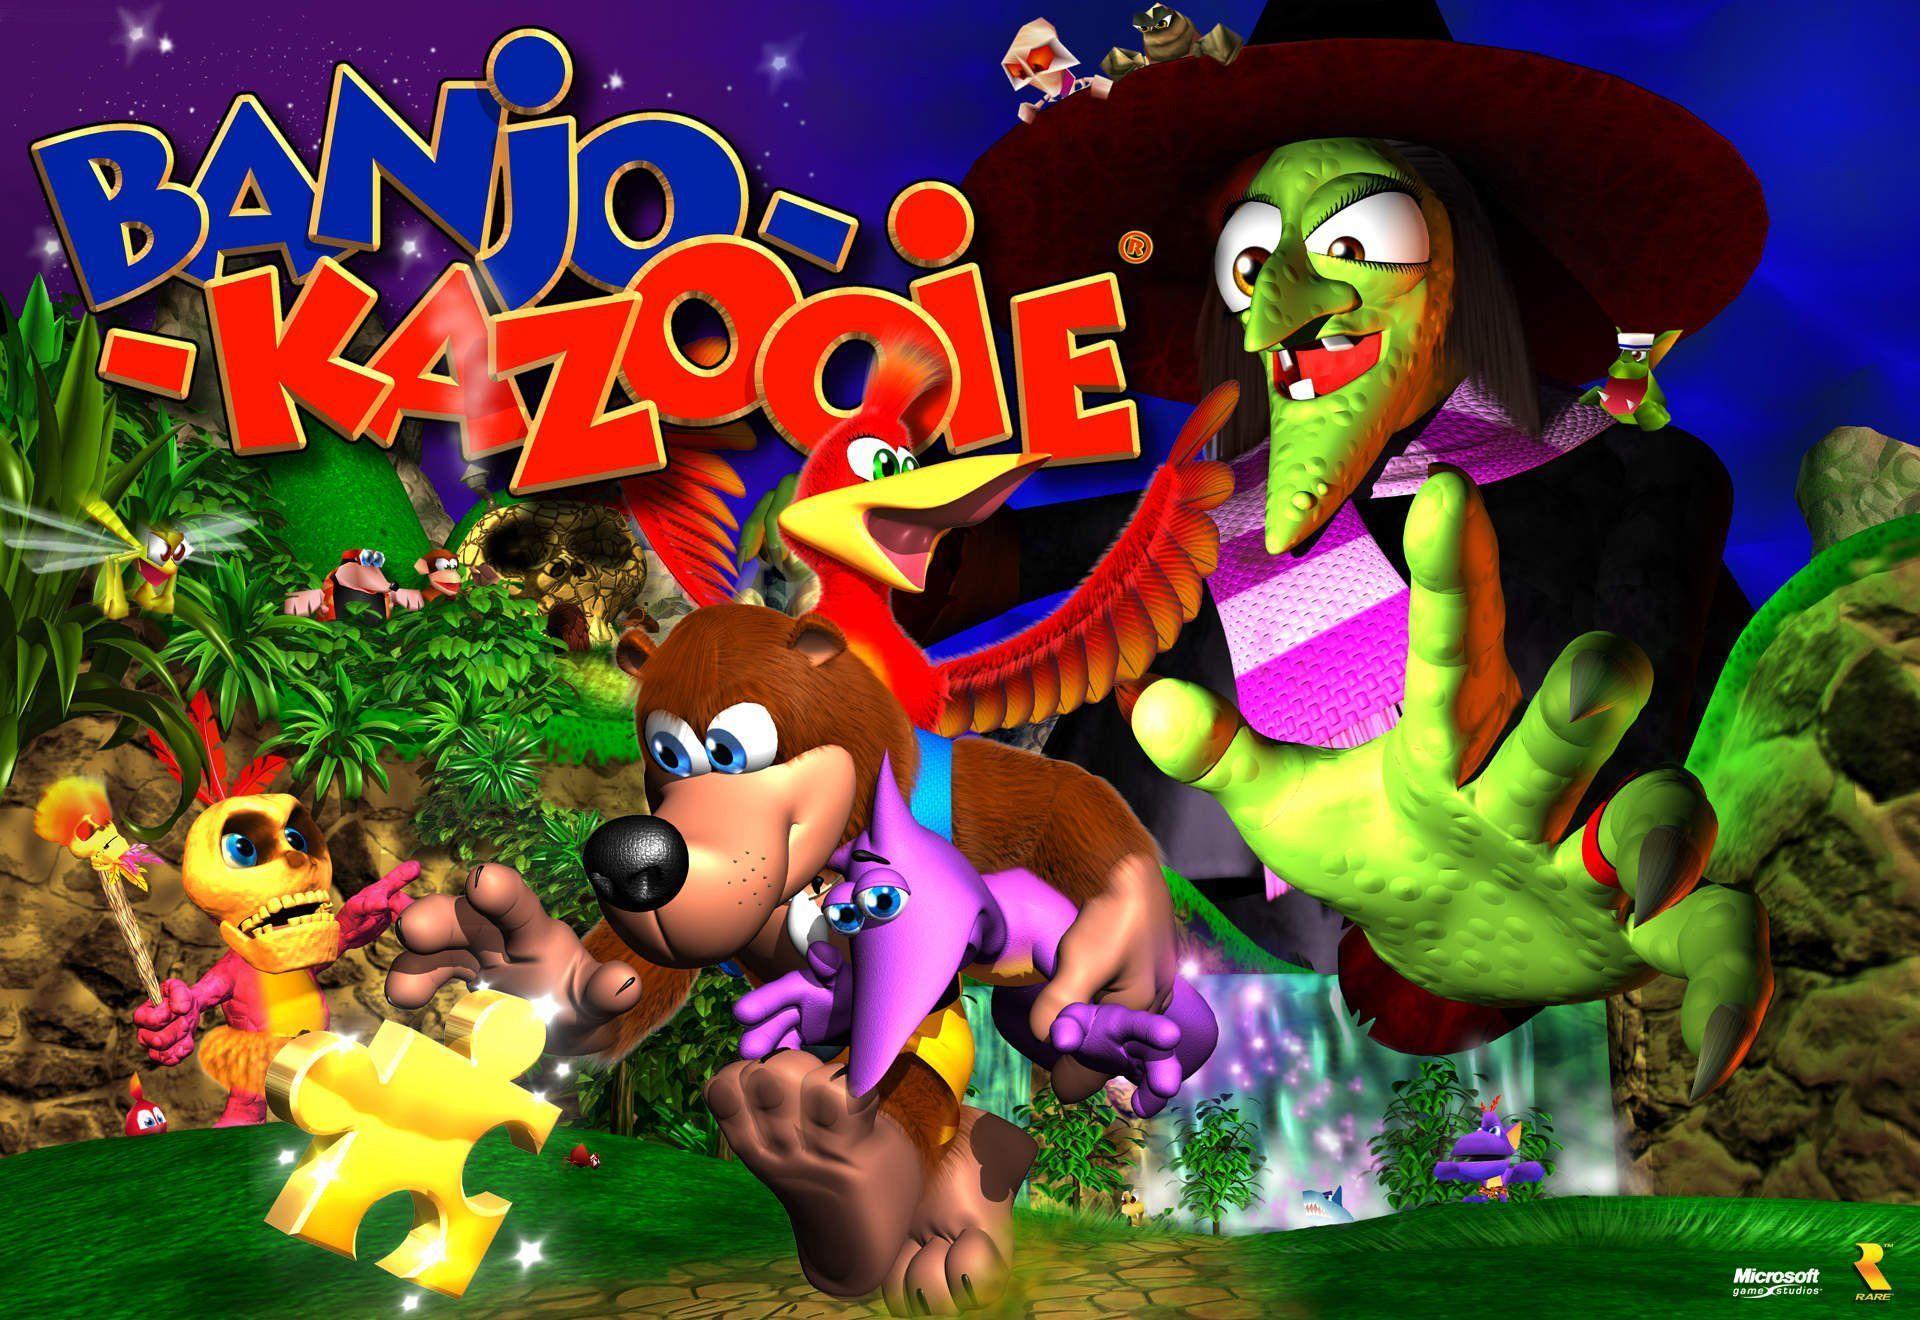 is banjo kazooie coming to switch